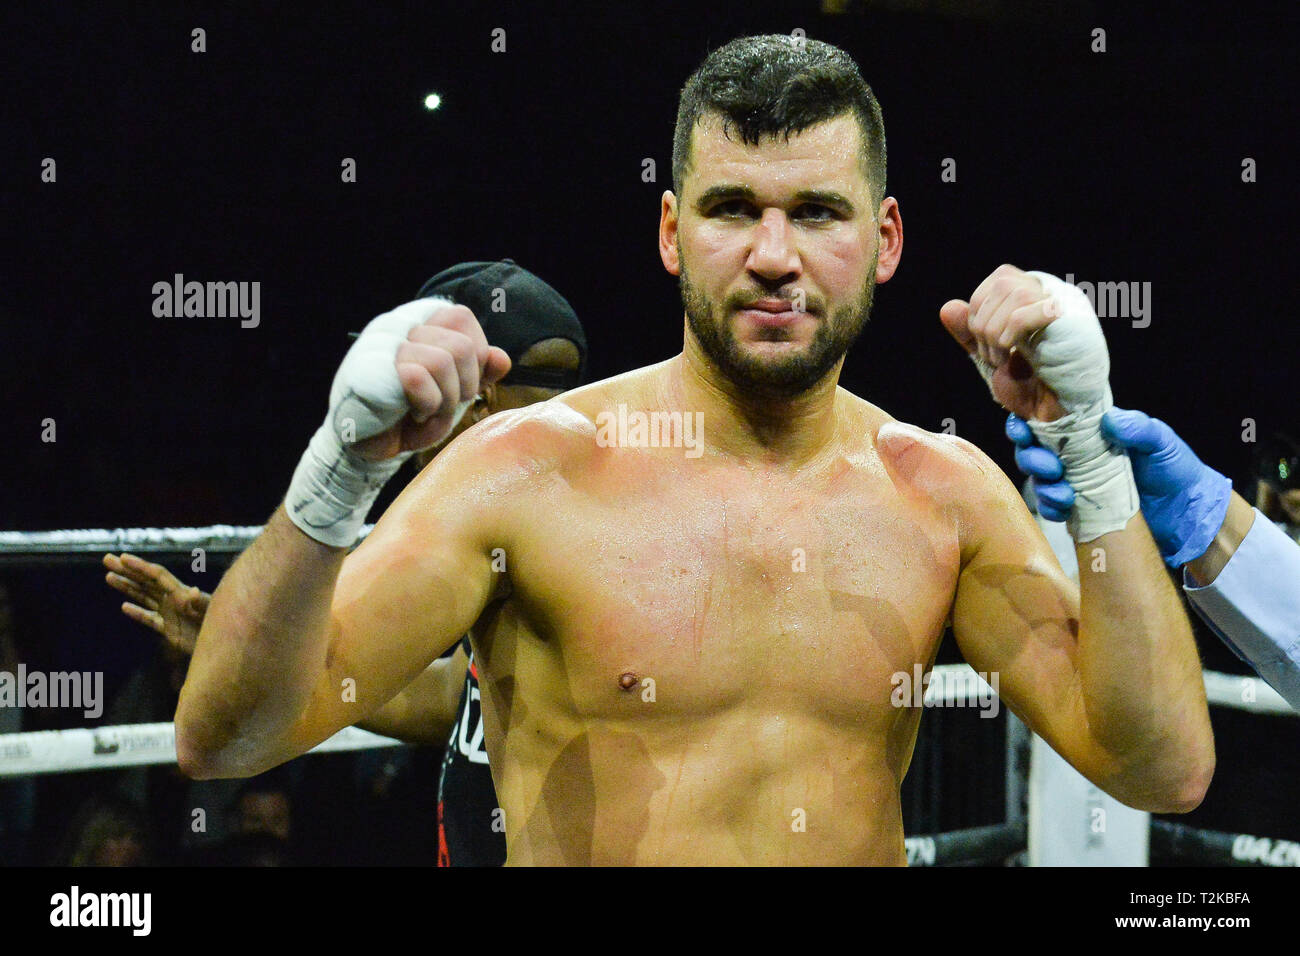 TORONTO, ON - MARCH 29, 2019: Nick Fantauzzi after the match against Maximiliano Corso during the TAKEOVER boxing event presents by Lee Baxter promoti Stock Photo